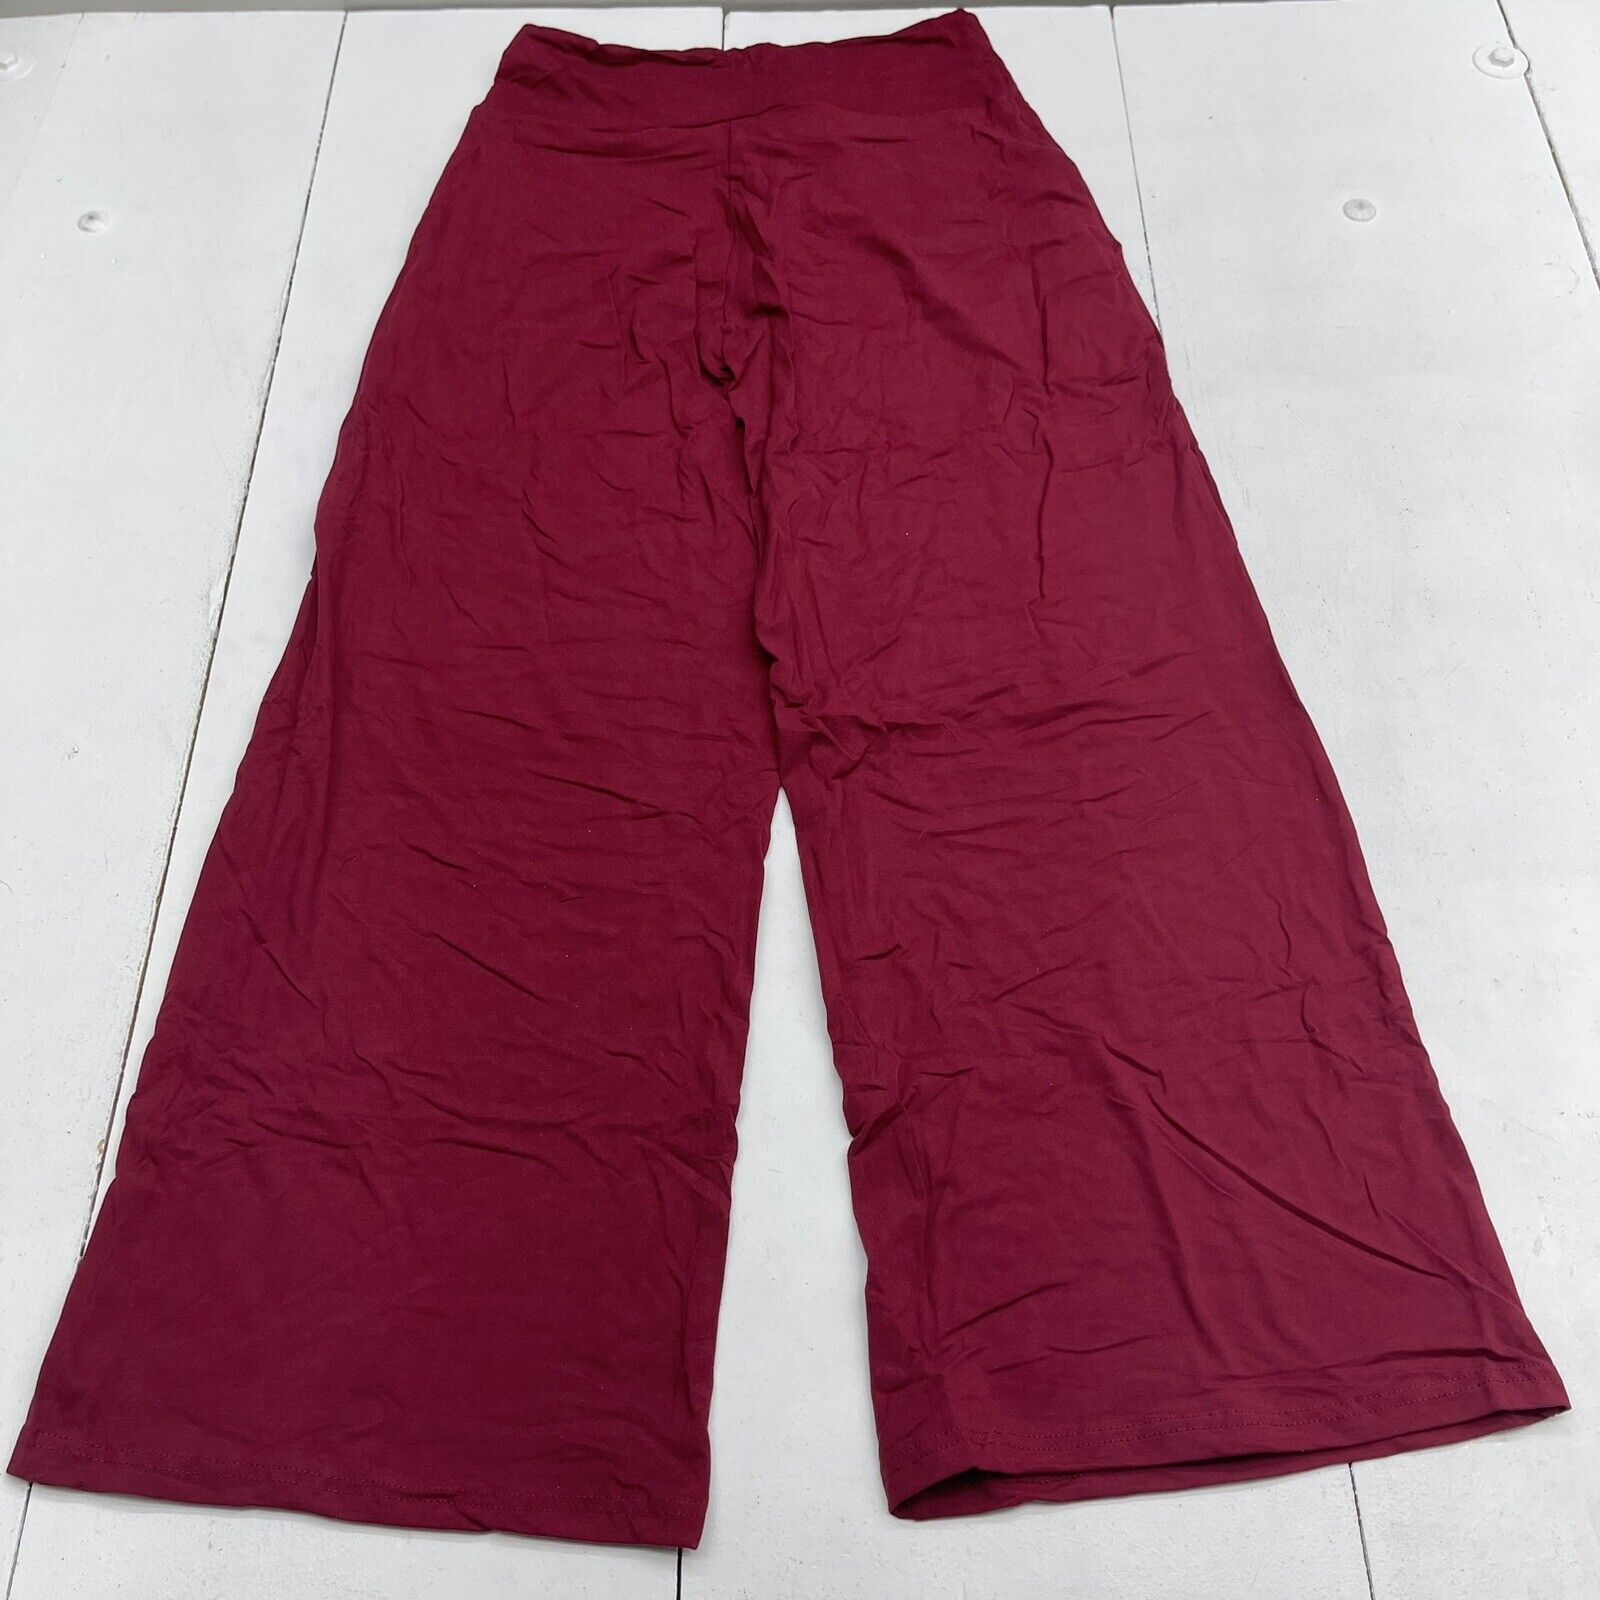 Tnnzeet Red Flared Casual Lounge Pants Women's Size XL New - beyond exchange